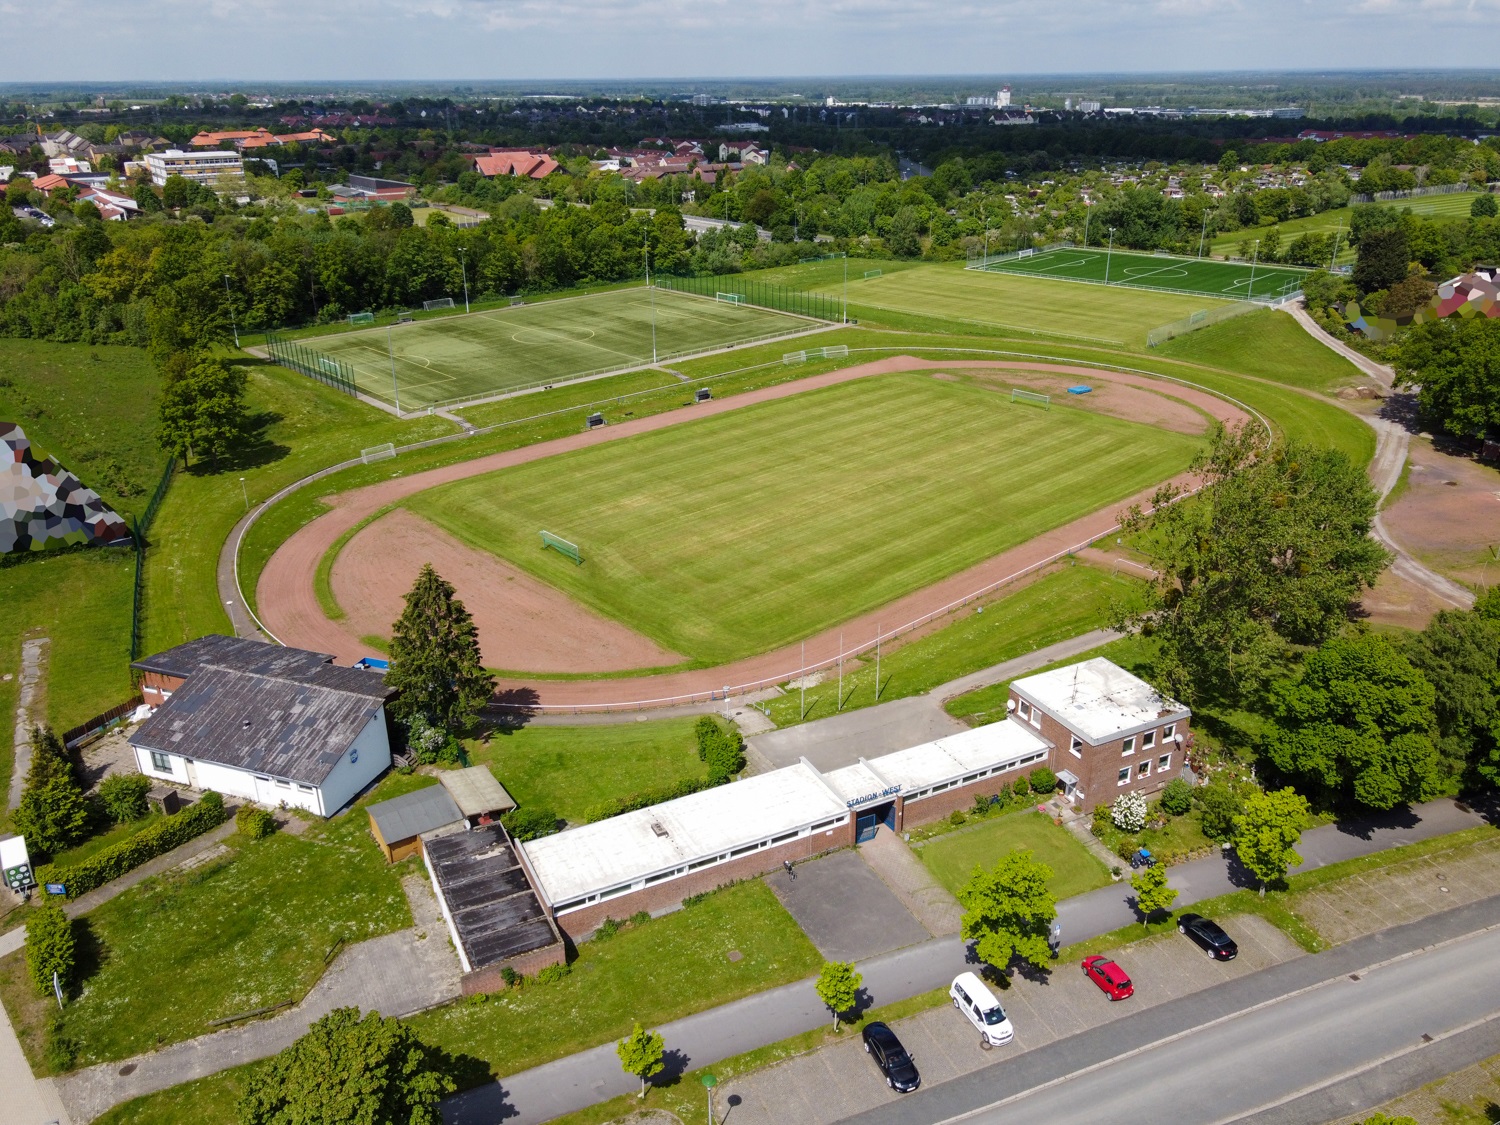 Aerial view of the outdoor sports facilities of Stadion West